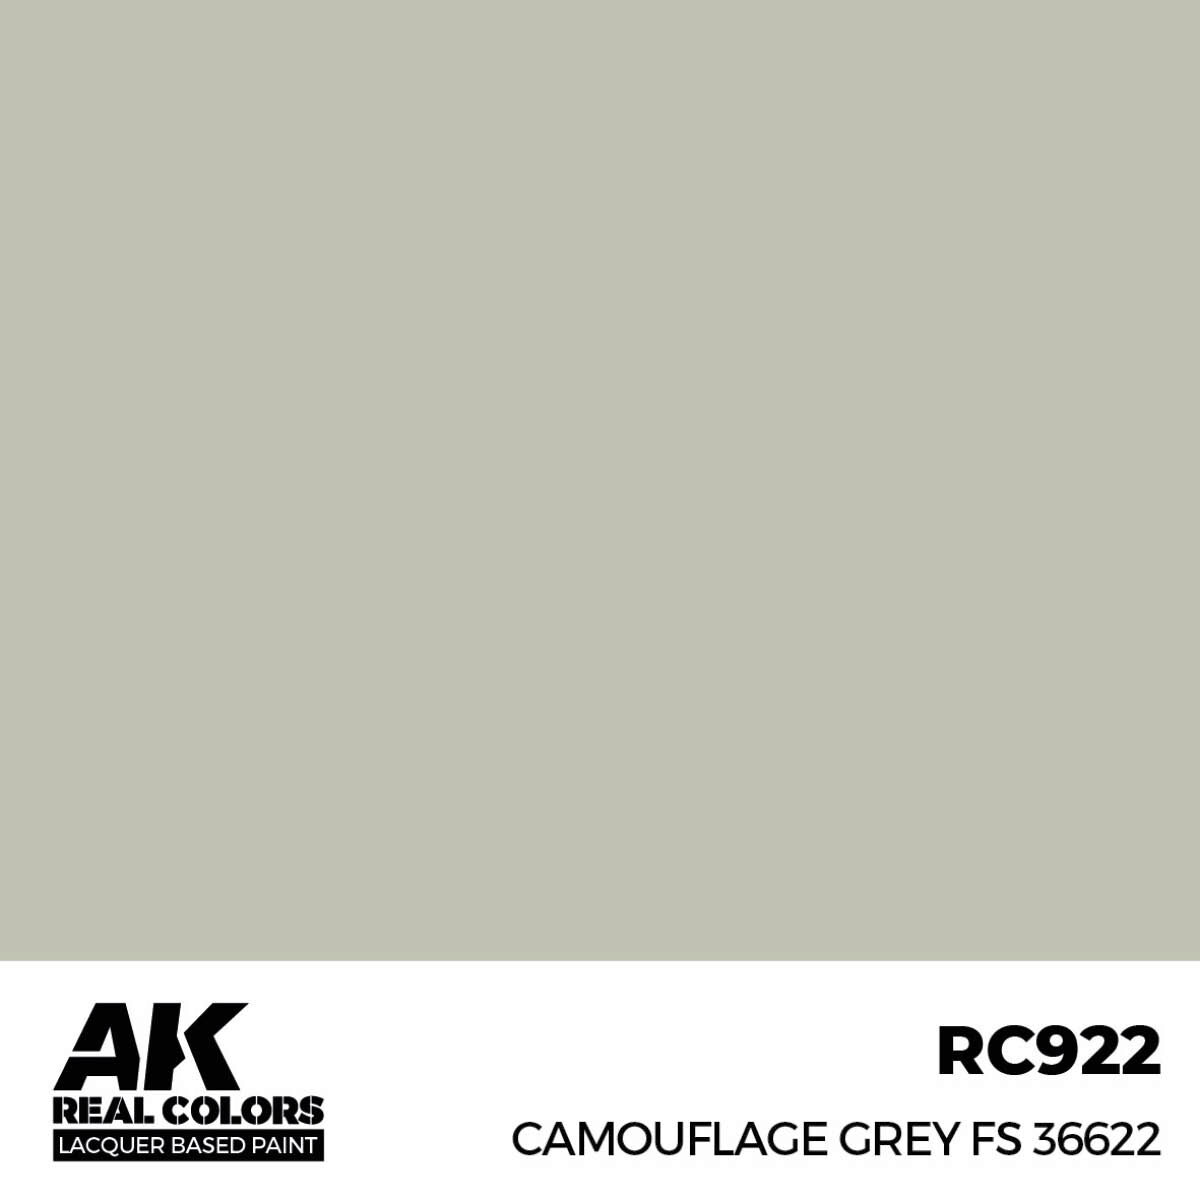 AK RC922 Real Colors Camouflage Grey FS 36622 17 ml.